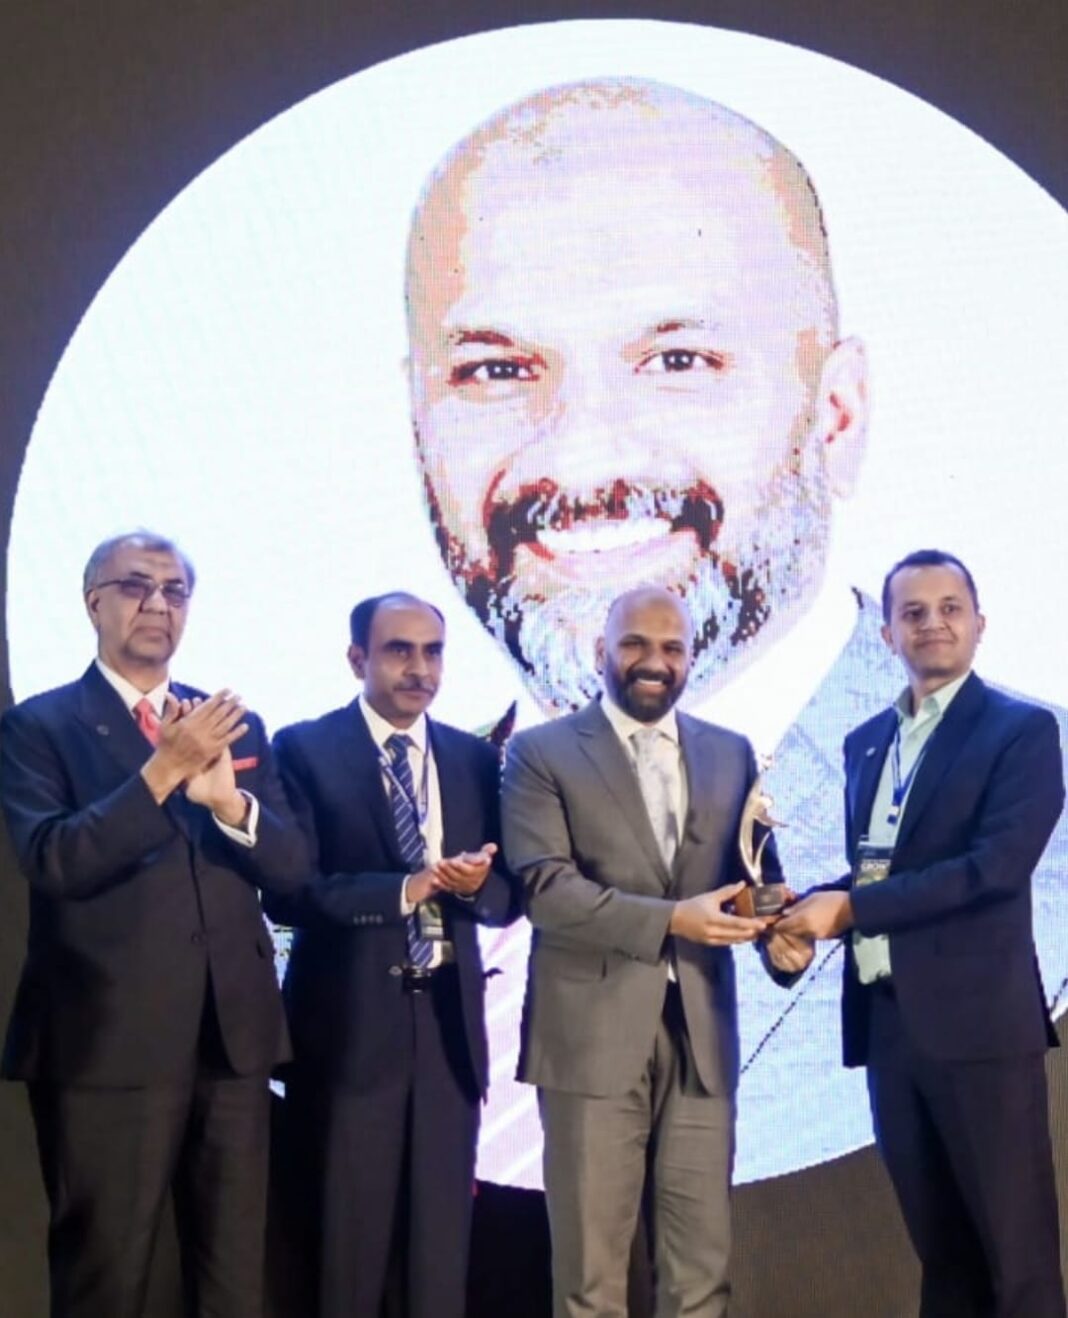 Ziad Chowdhrey awarded for professional excellence as the finance leader!